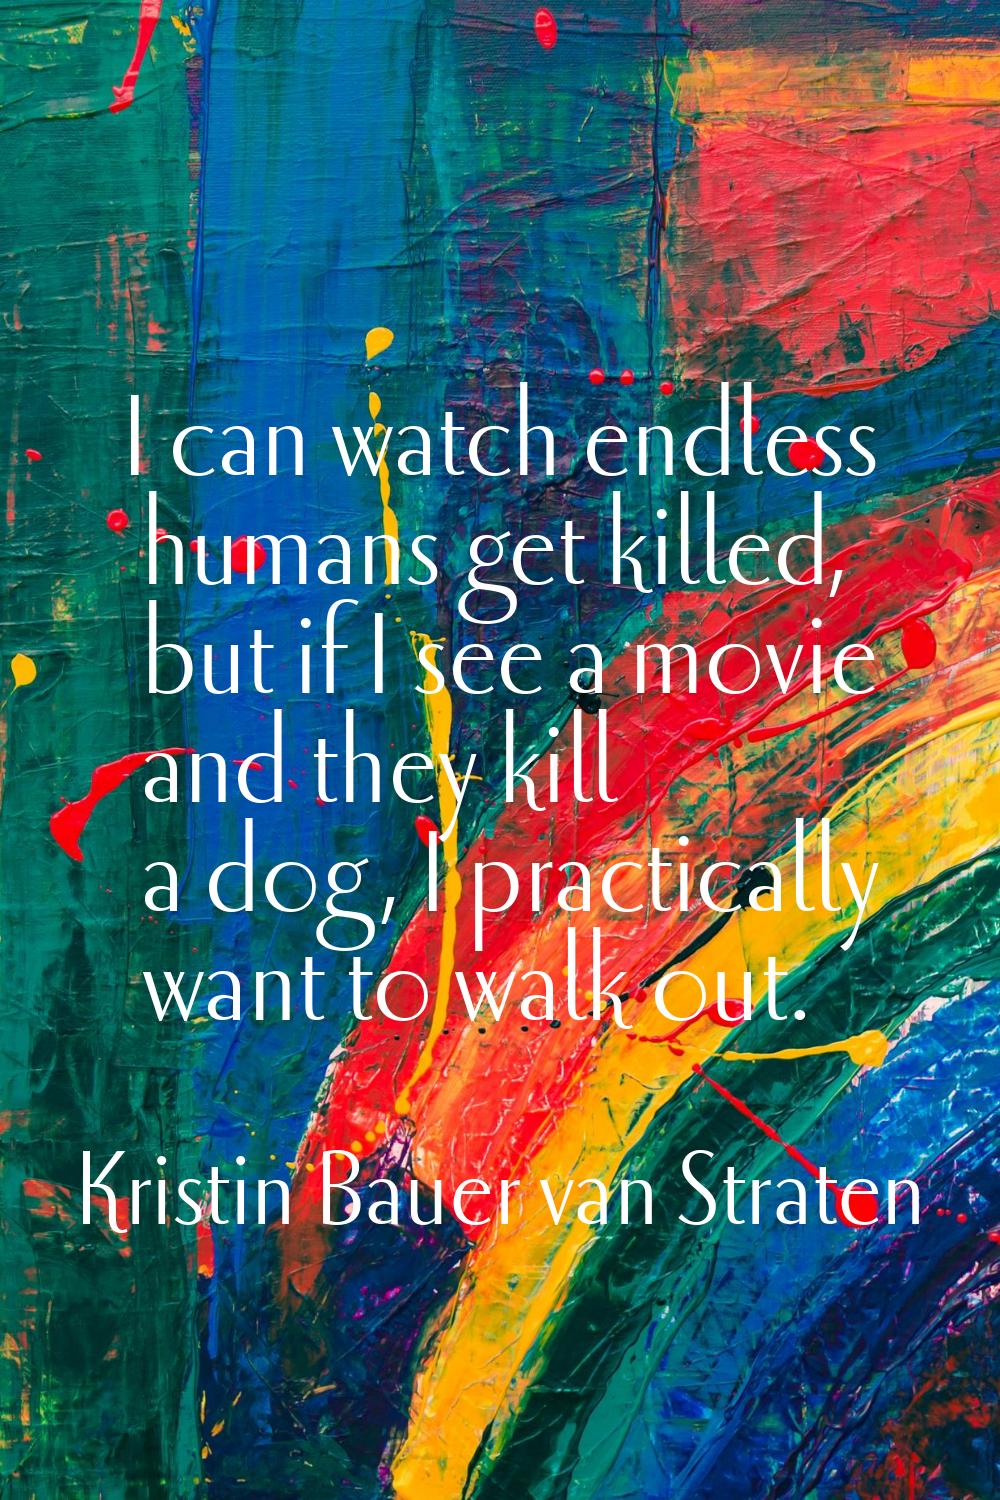 I can watch endless humans get killed, but if I see a movie and they kill a dog, I practically want